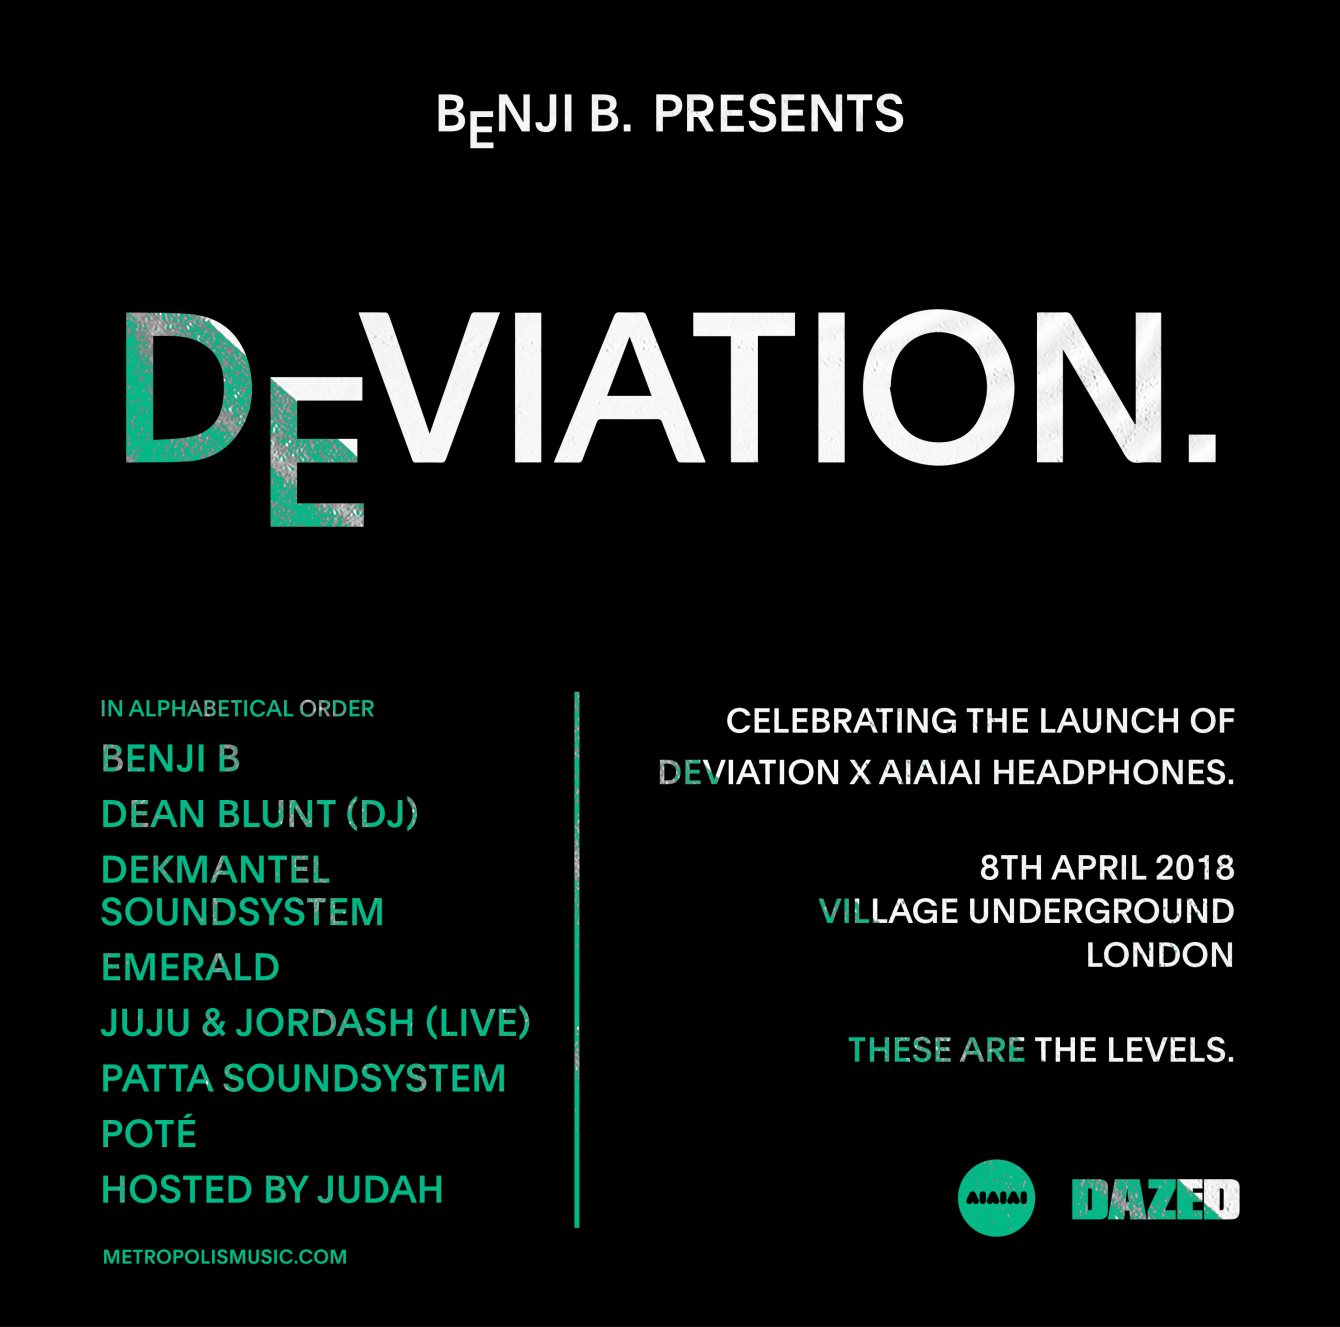 Live Review: Benji B presents Deviation w/ Four Tet & Floating Points